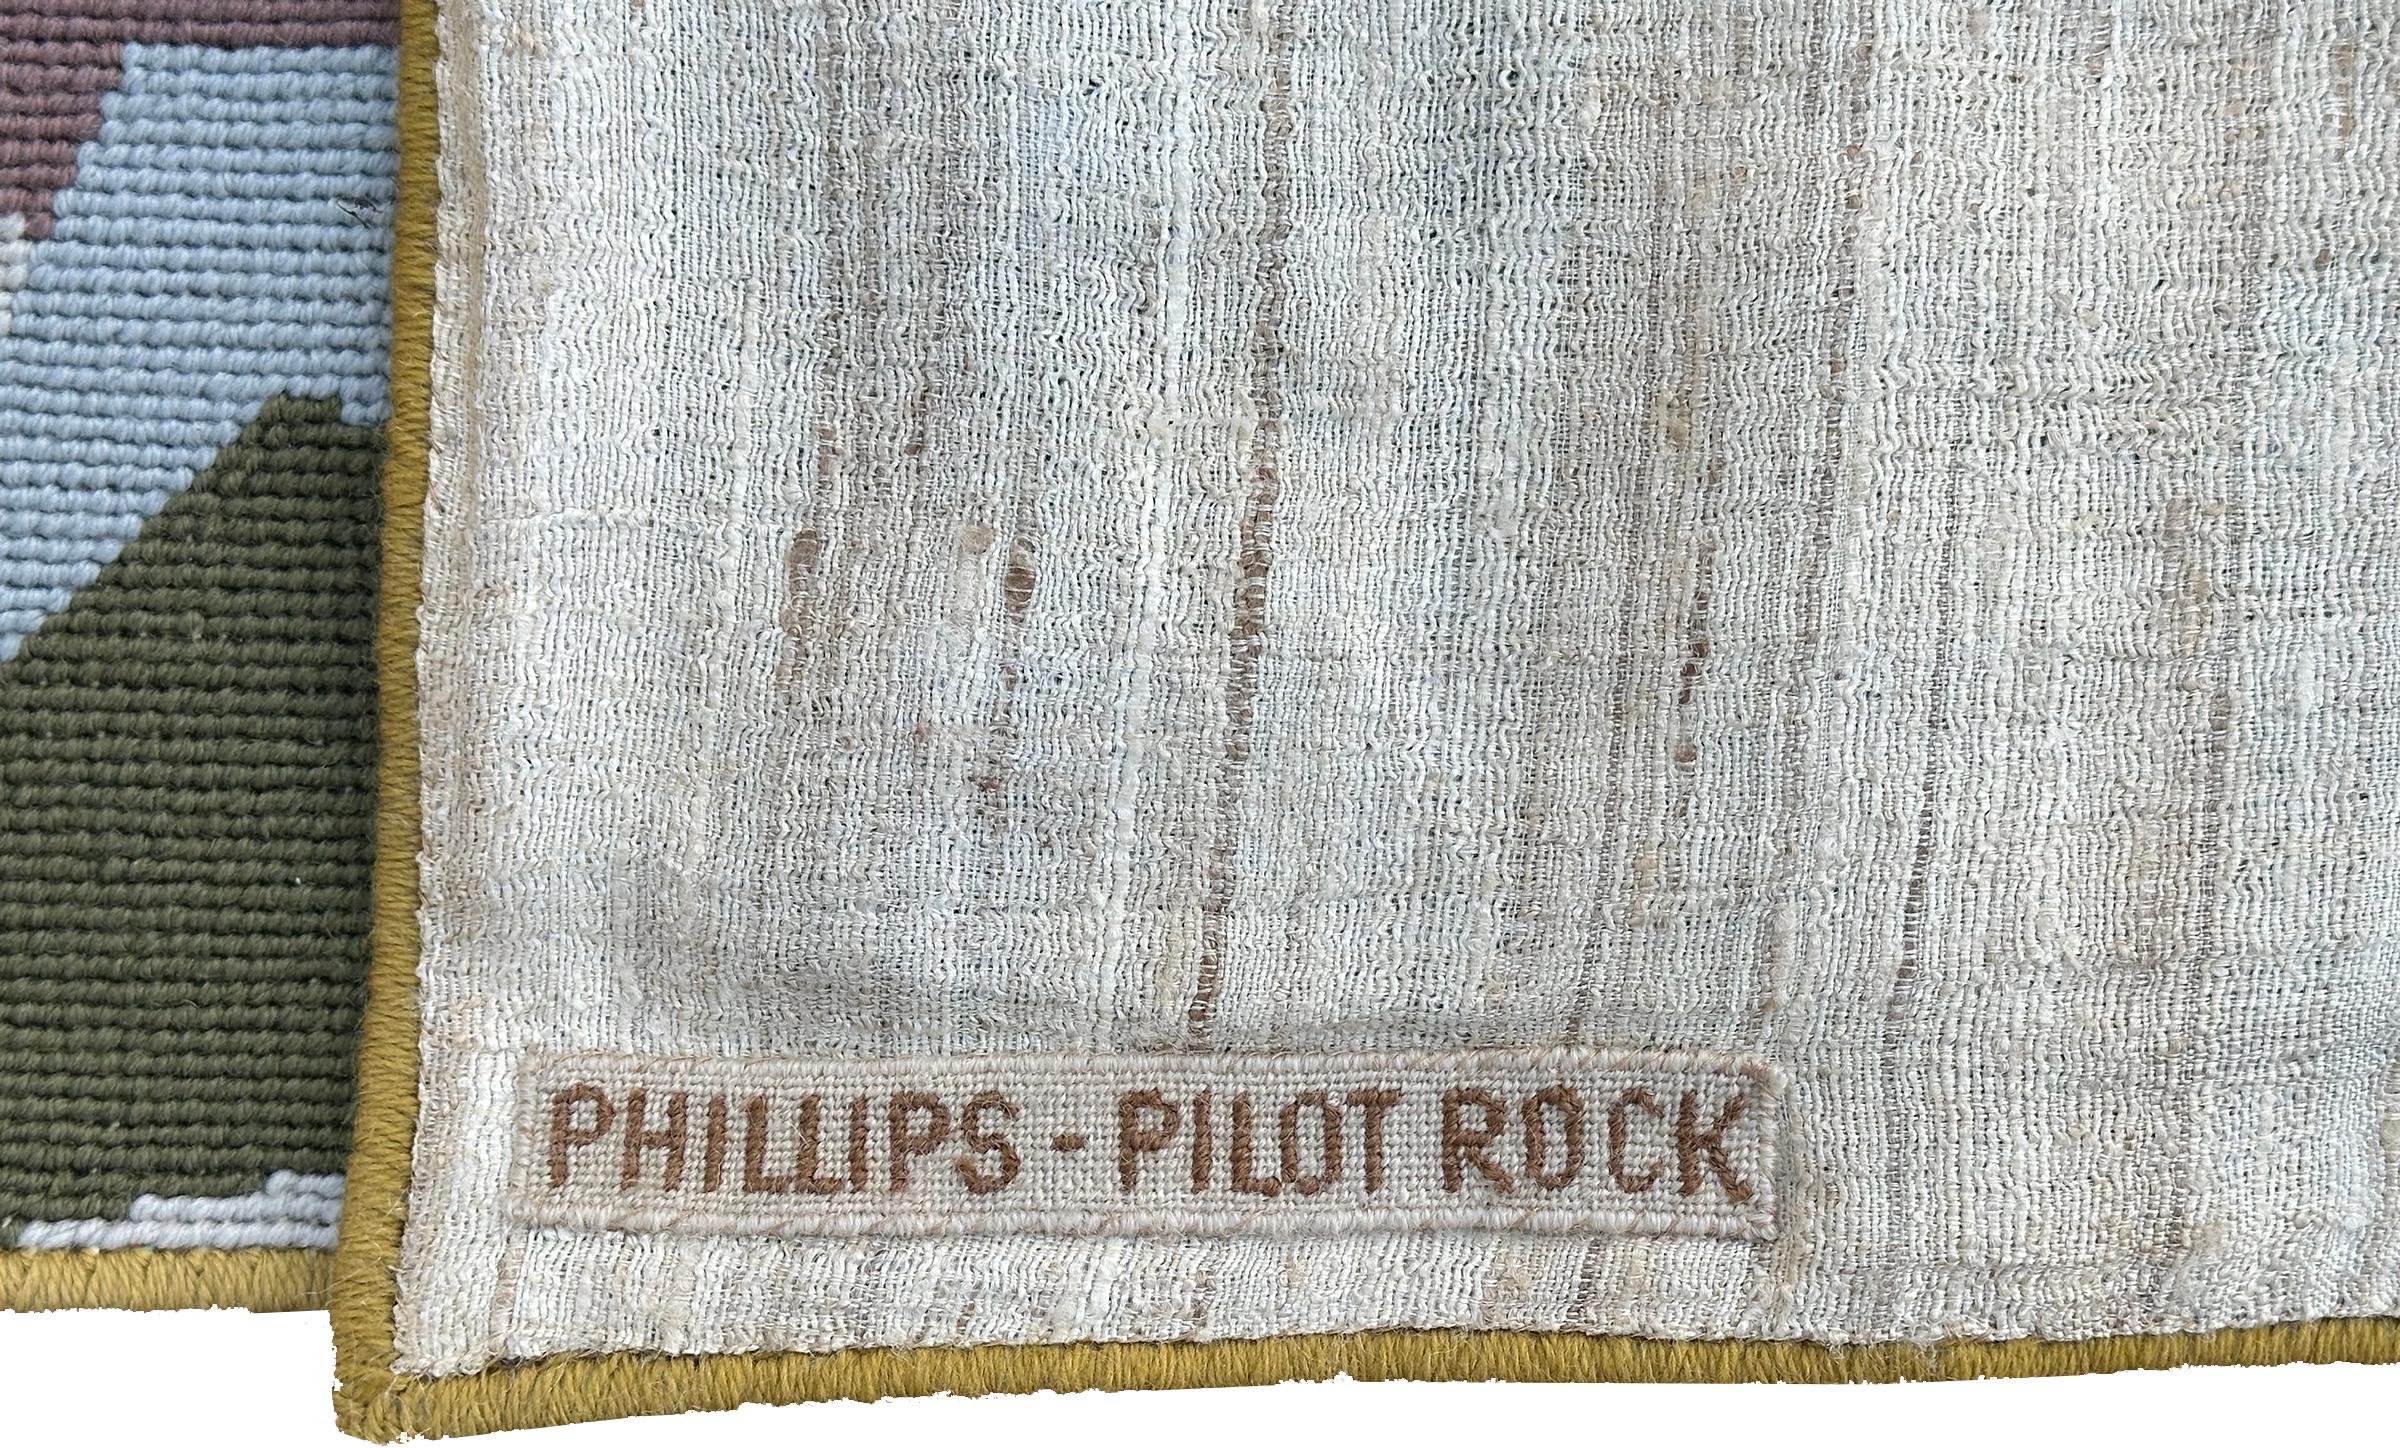 1967 Phillips Pilot Rock Tapestry Yacht Club Rare Needlepoint 3x8ft 89cm x 249cm For Sale 8